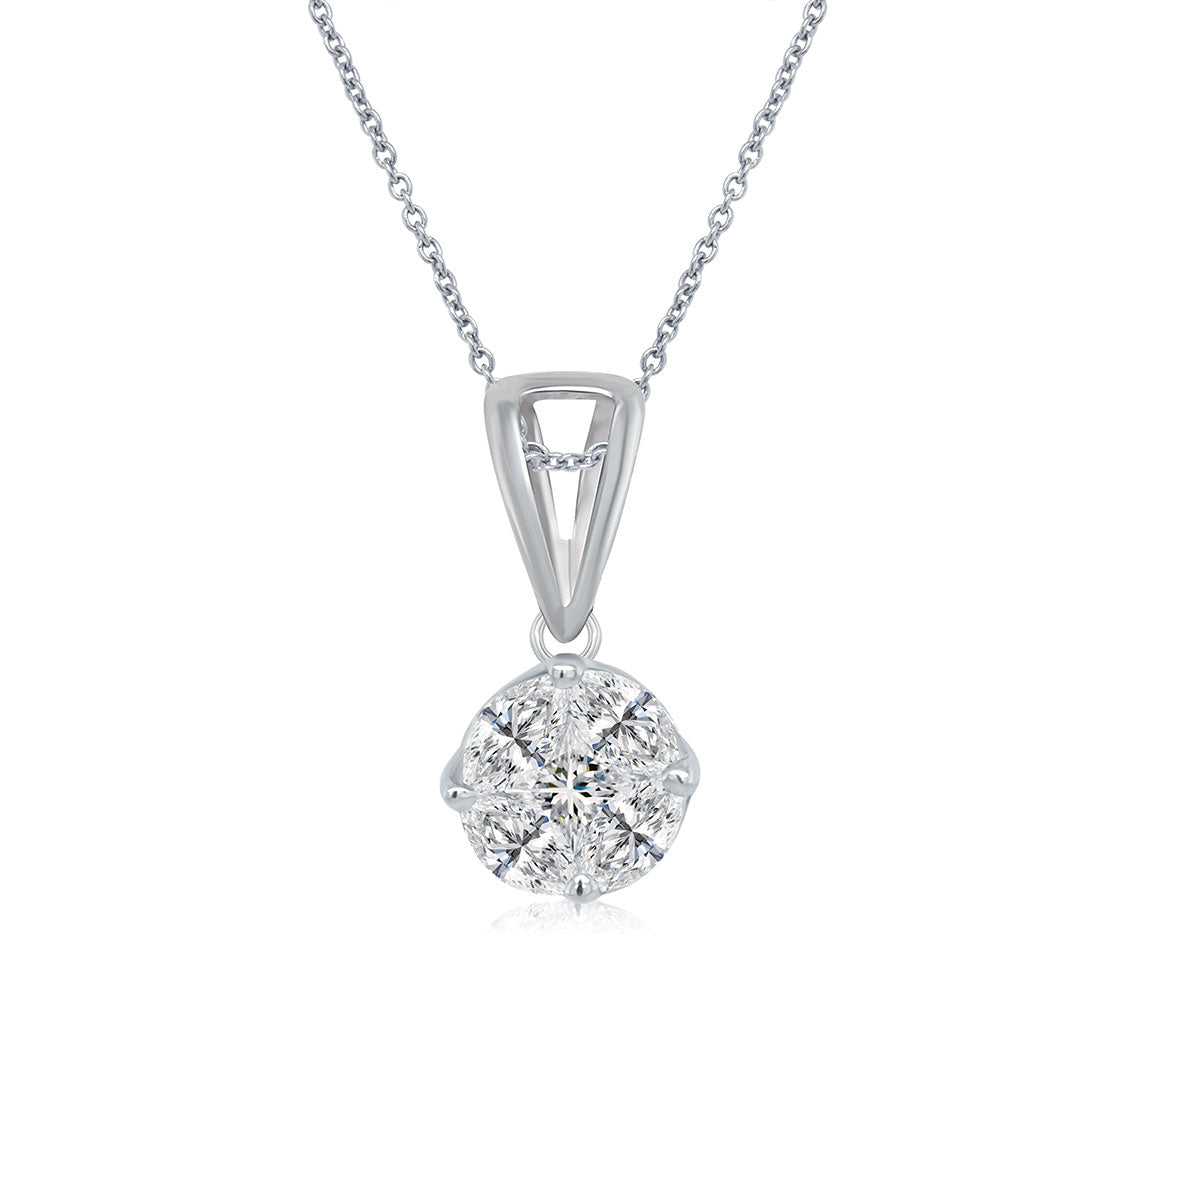 Number Pendant Necklace - The M Jewelers